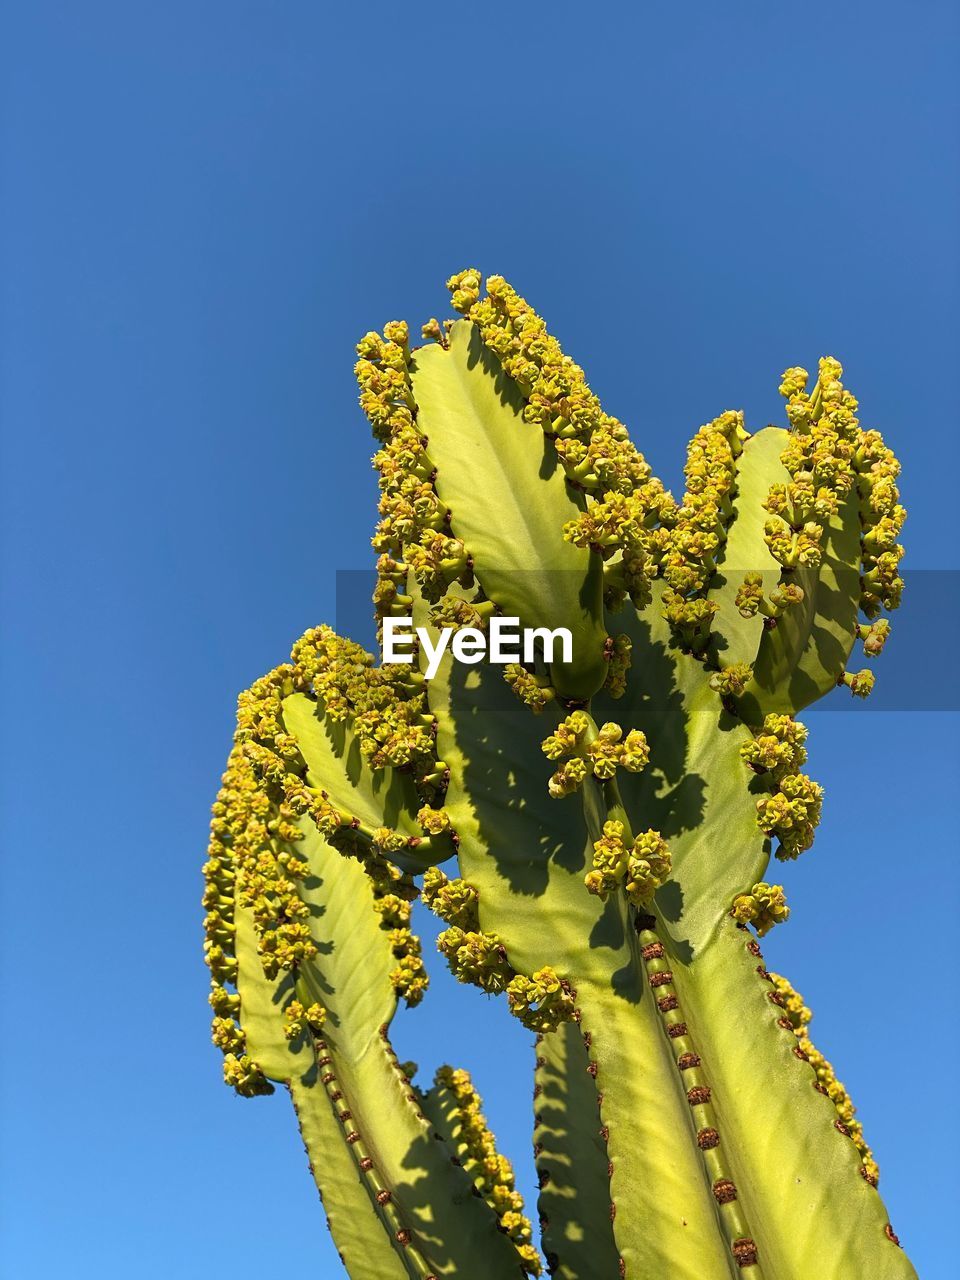 LOW ANGLE VIEW OF YELLOW FLOWERING PLANT AGAINST CLEAR BLUE SKY